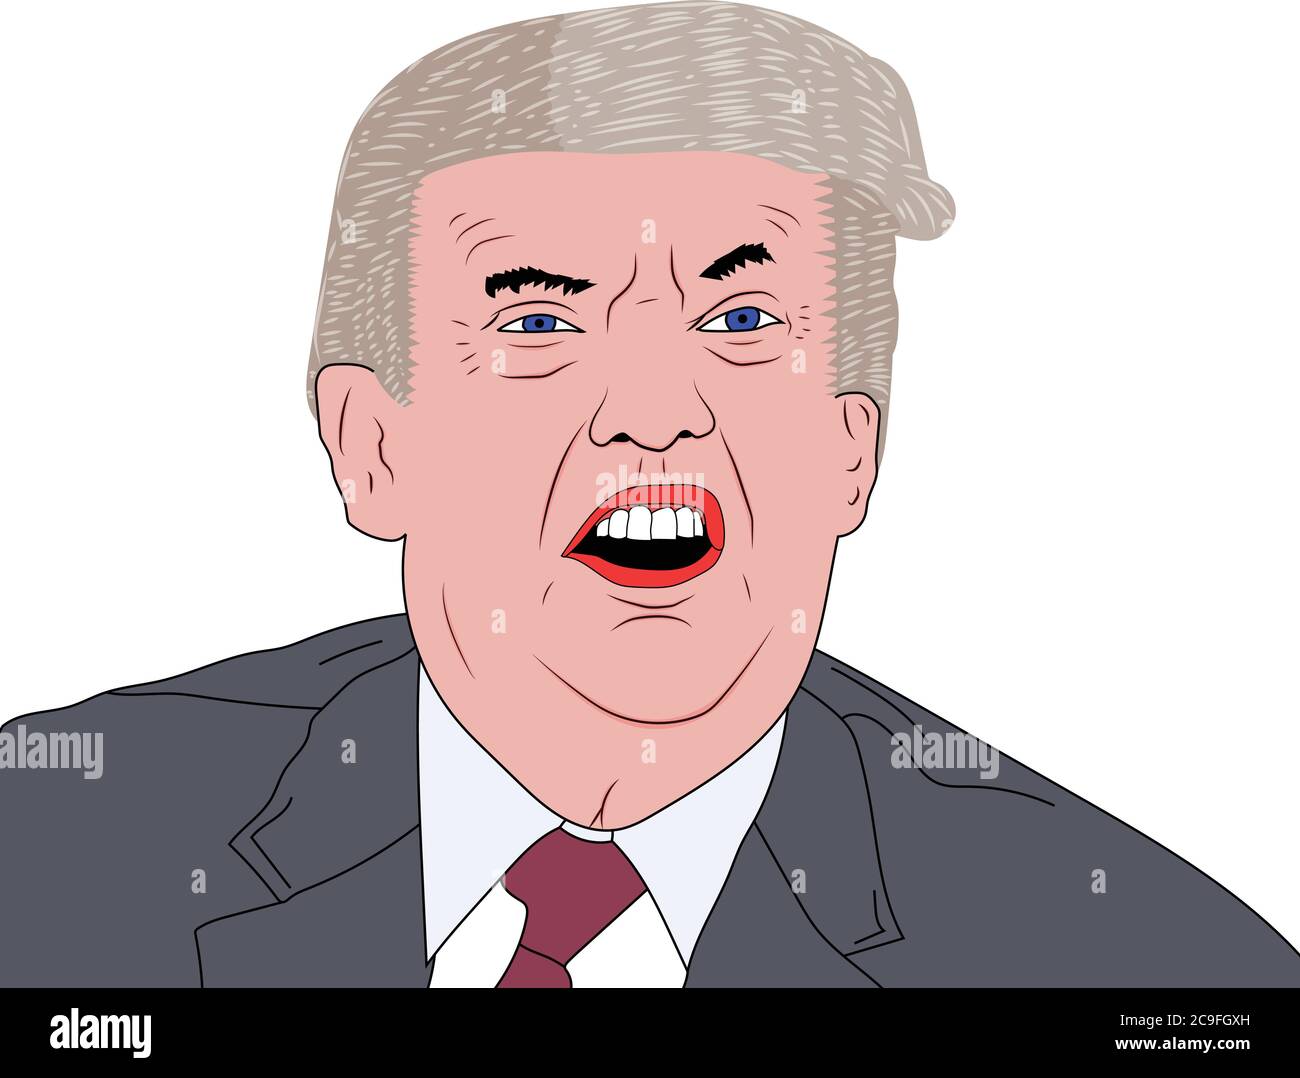 Donald Trump - President of the United States Stock Vector